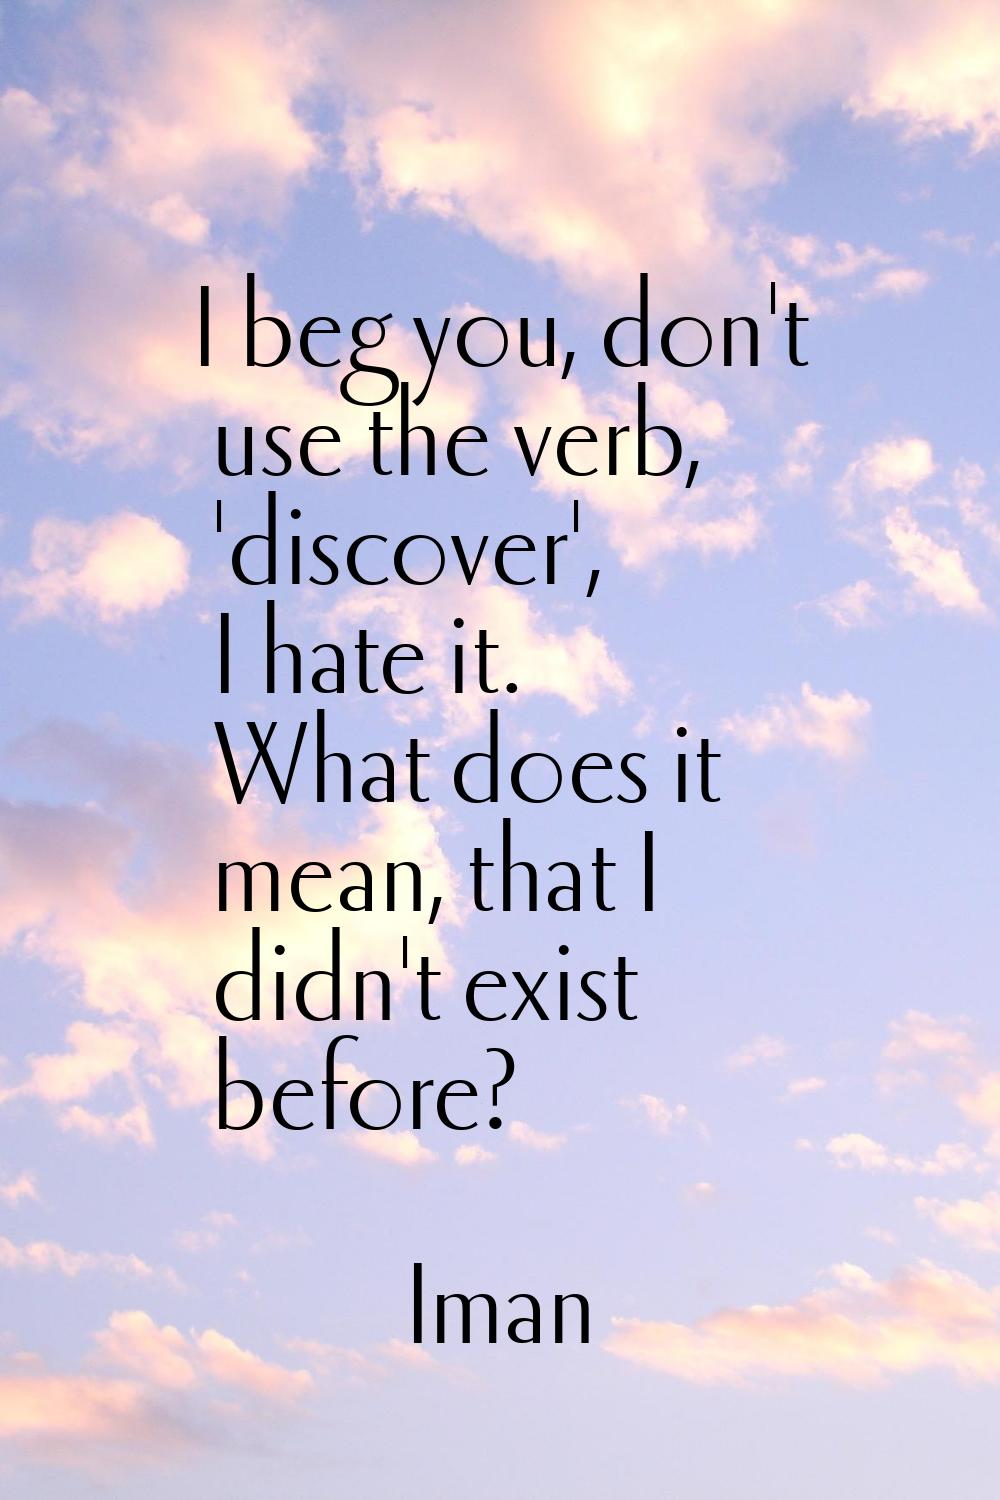 I beg you, don't use the verb, 'discover', I hate it. What does it mean, that I didn't exist before